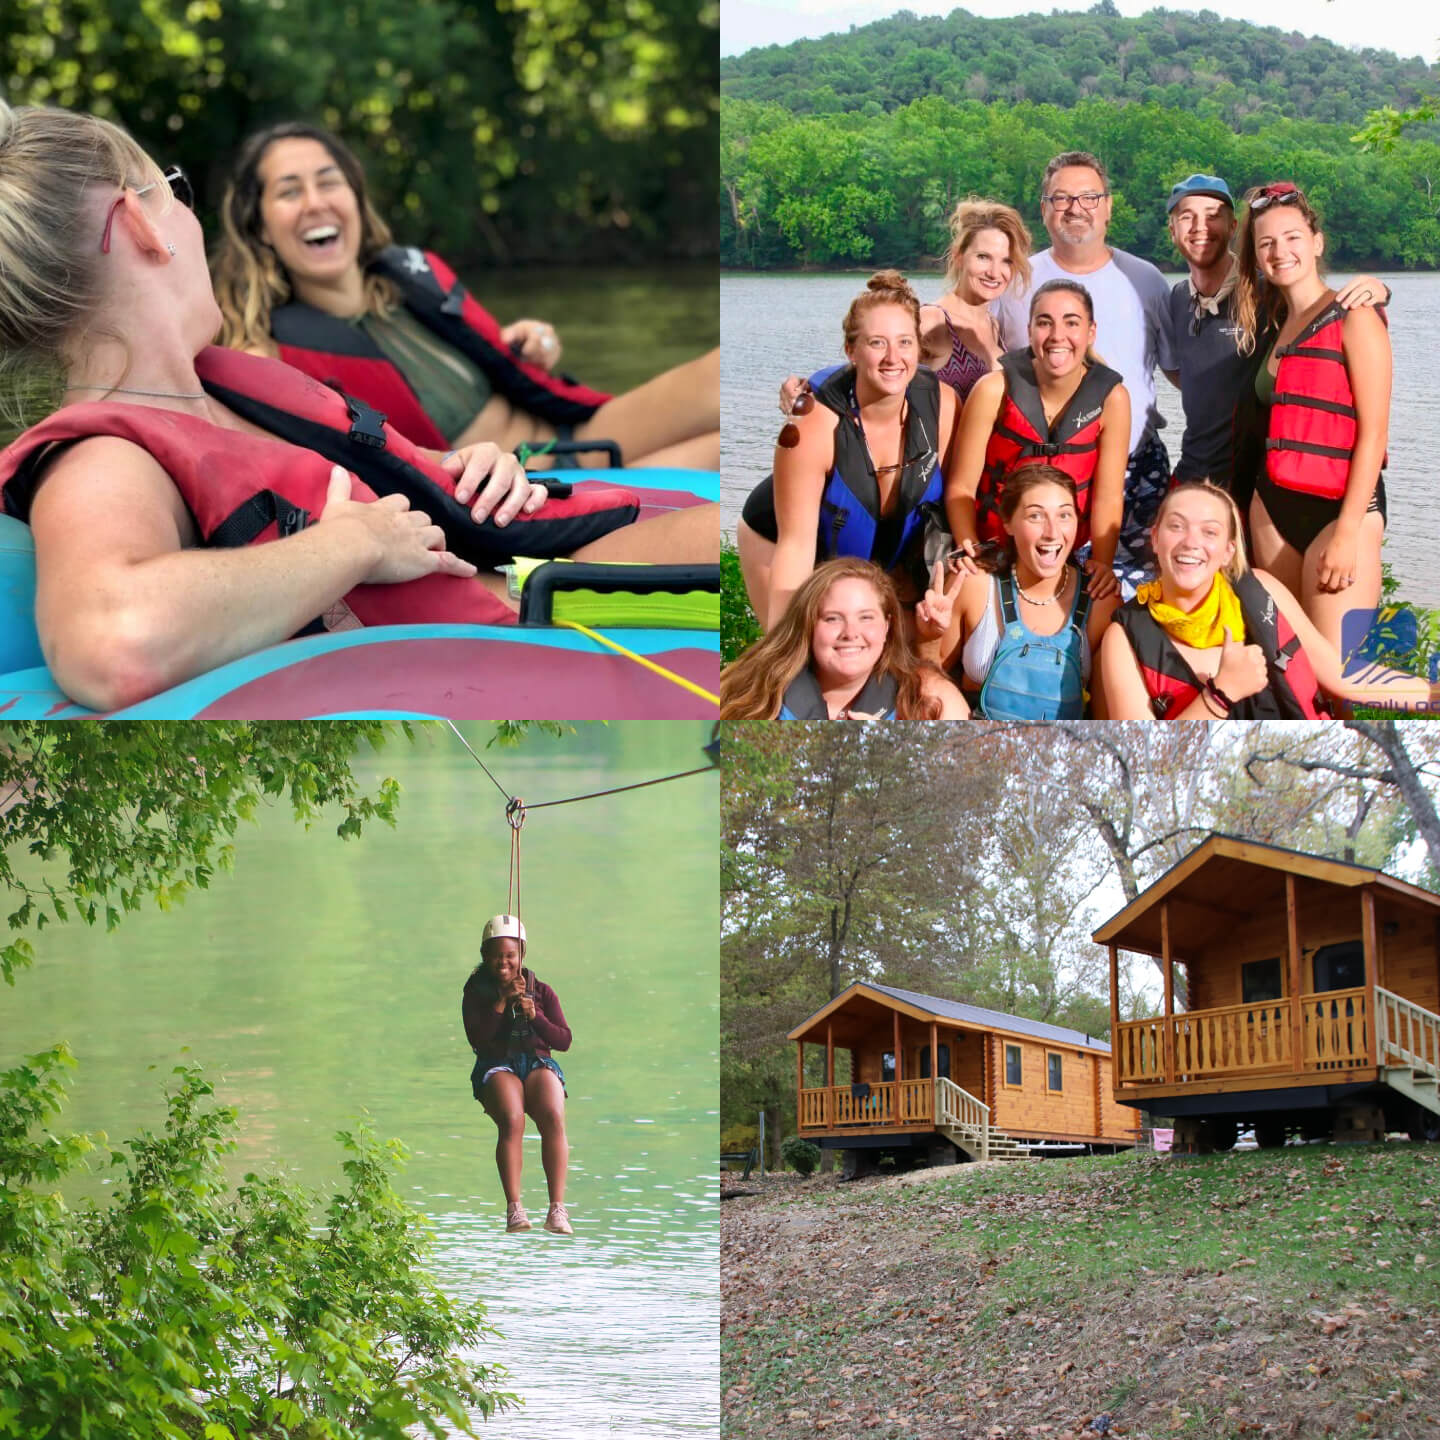 Activities offered through River Riders - tubing, ziplining and cabin rentals